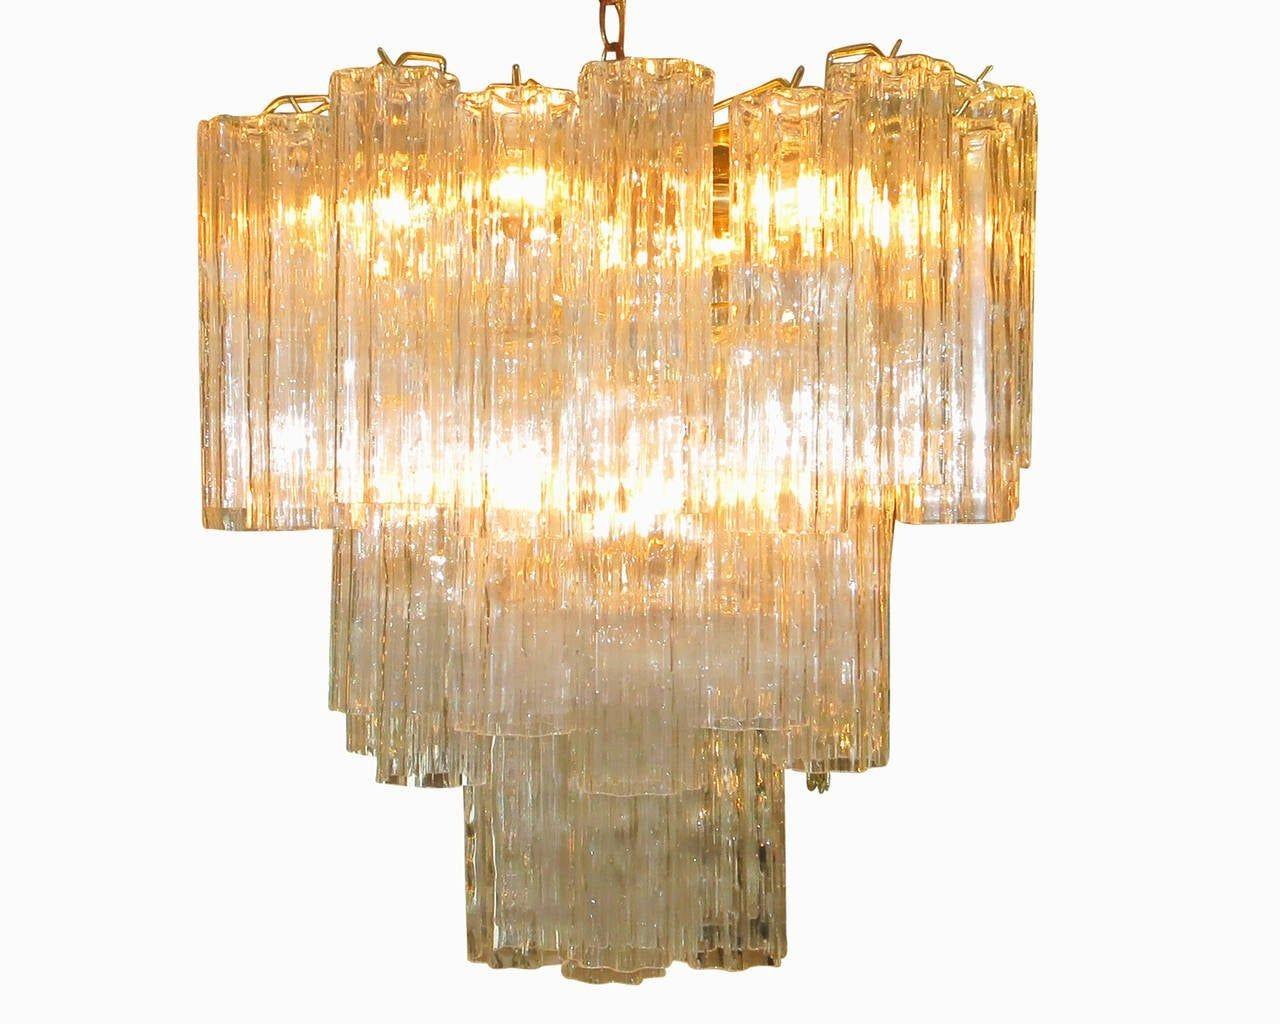 Made in Italy, this gorgeous Venini round chandelier features a brass frame and three tiers of textured glass pendants, known as tronchi. The light glistens through the glass pendants, which are uniform in shape and size.

Note that the chandelier